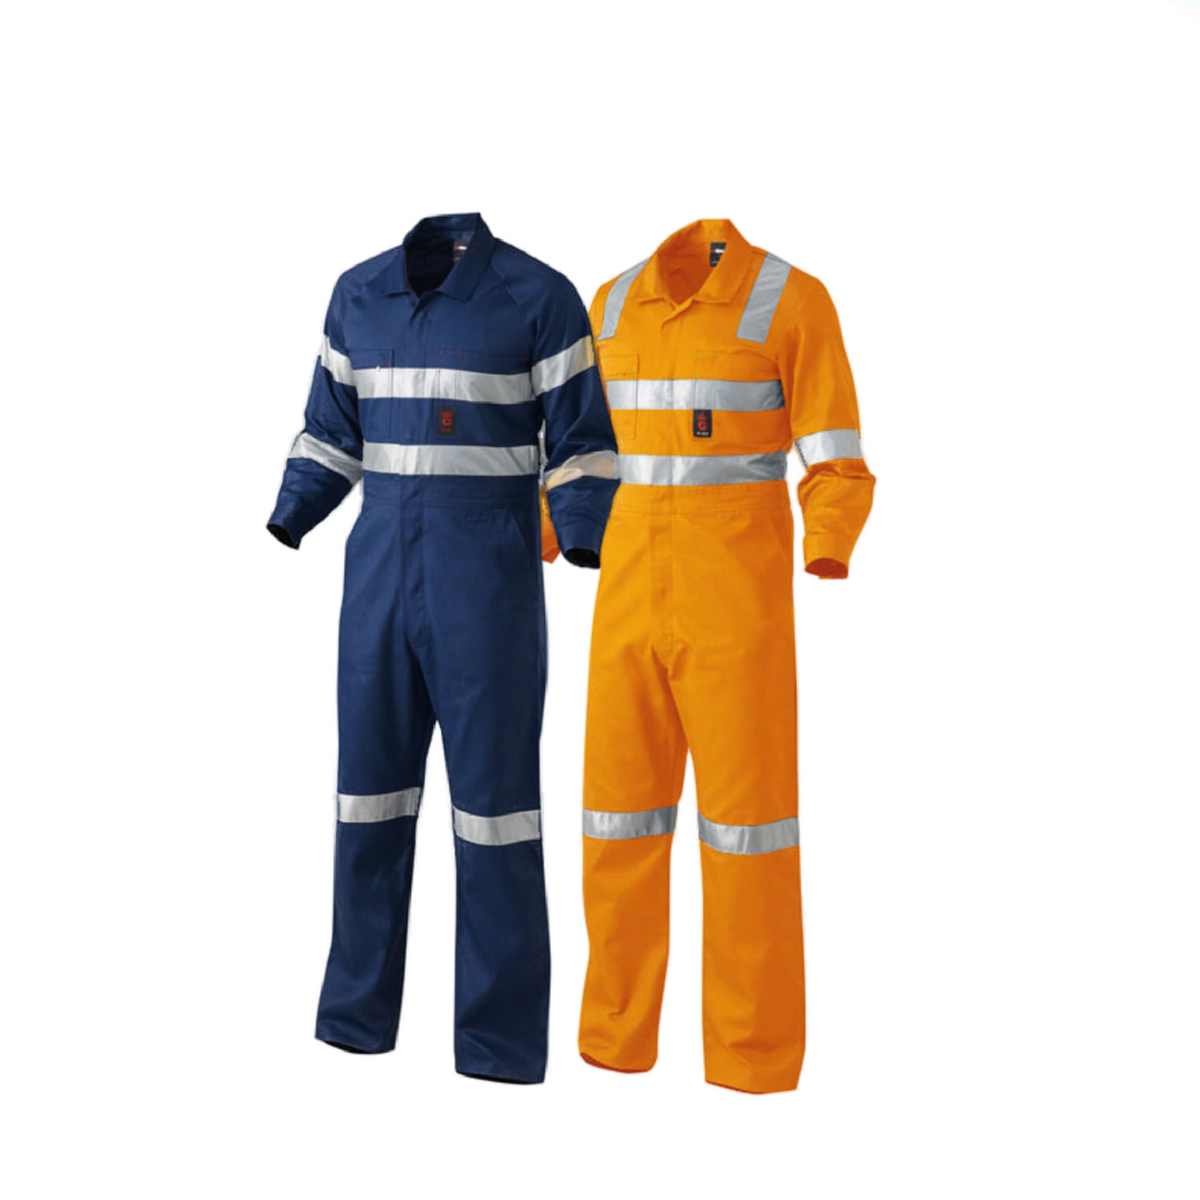 KingGee Mens Lightweight Cotton Drill Overalls Hi-Vis Taped Safety Work K51305-Collins Clothing Co